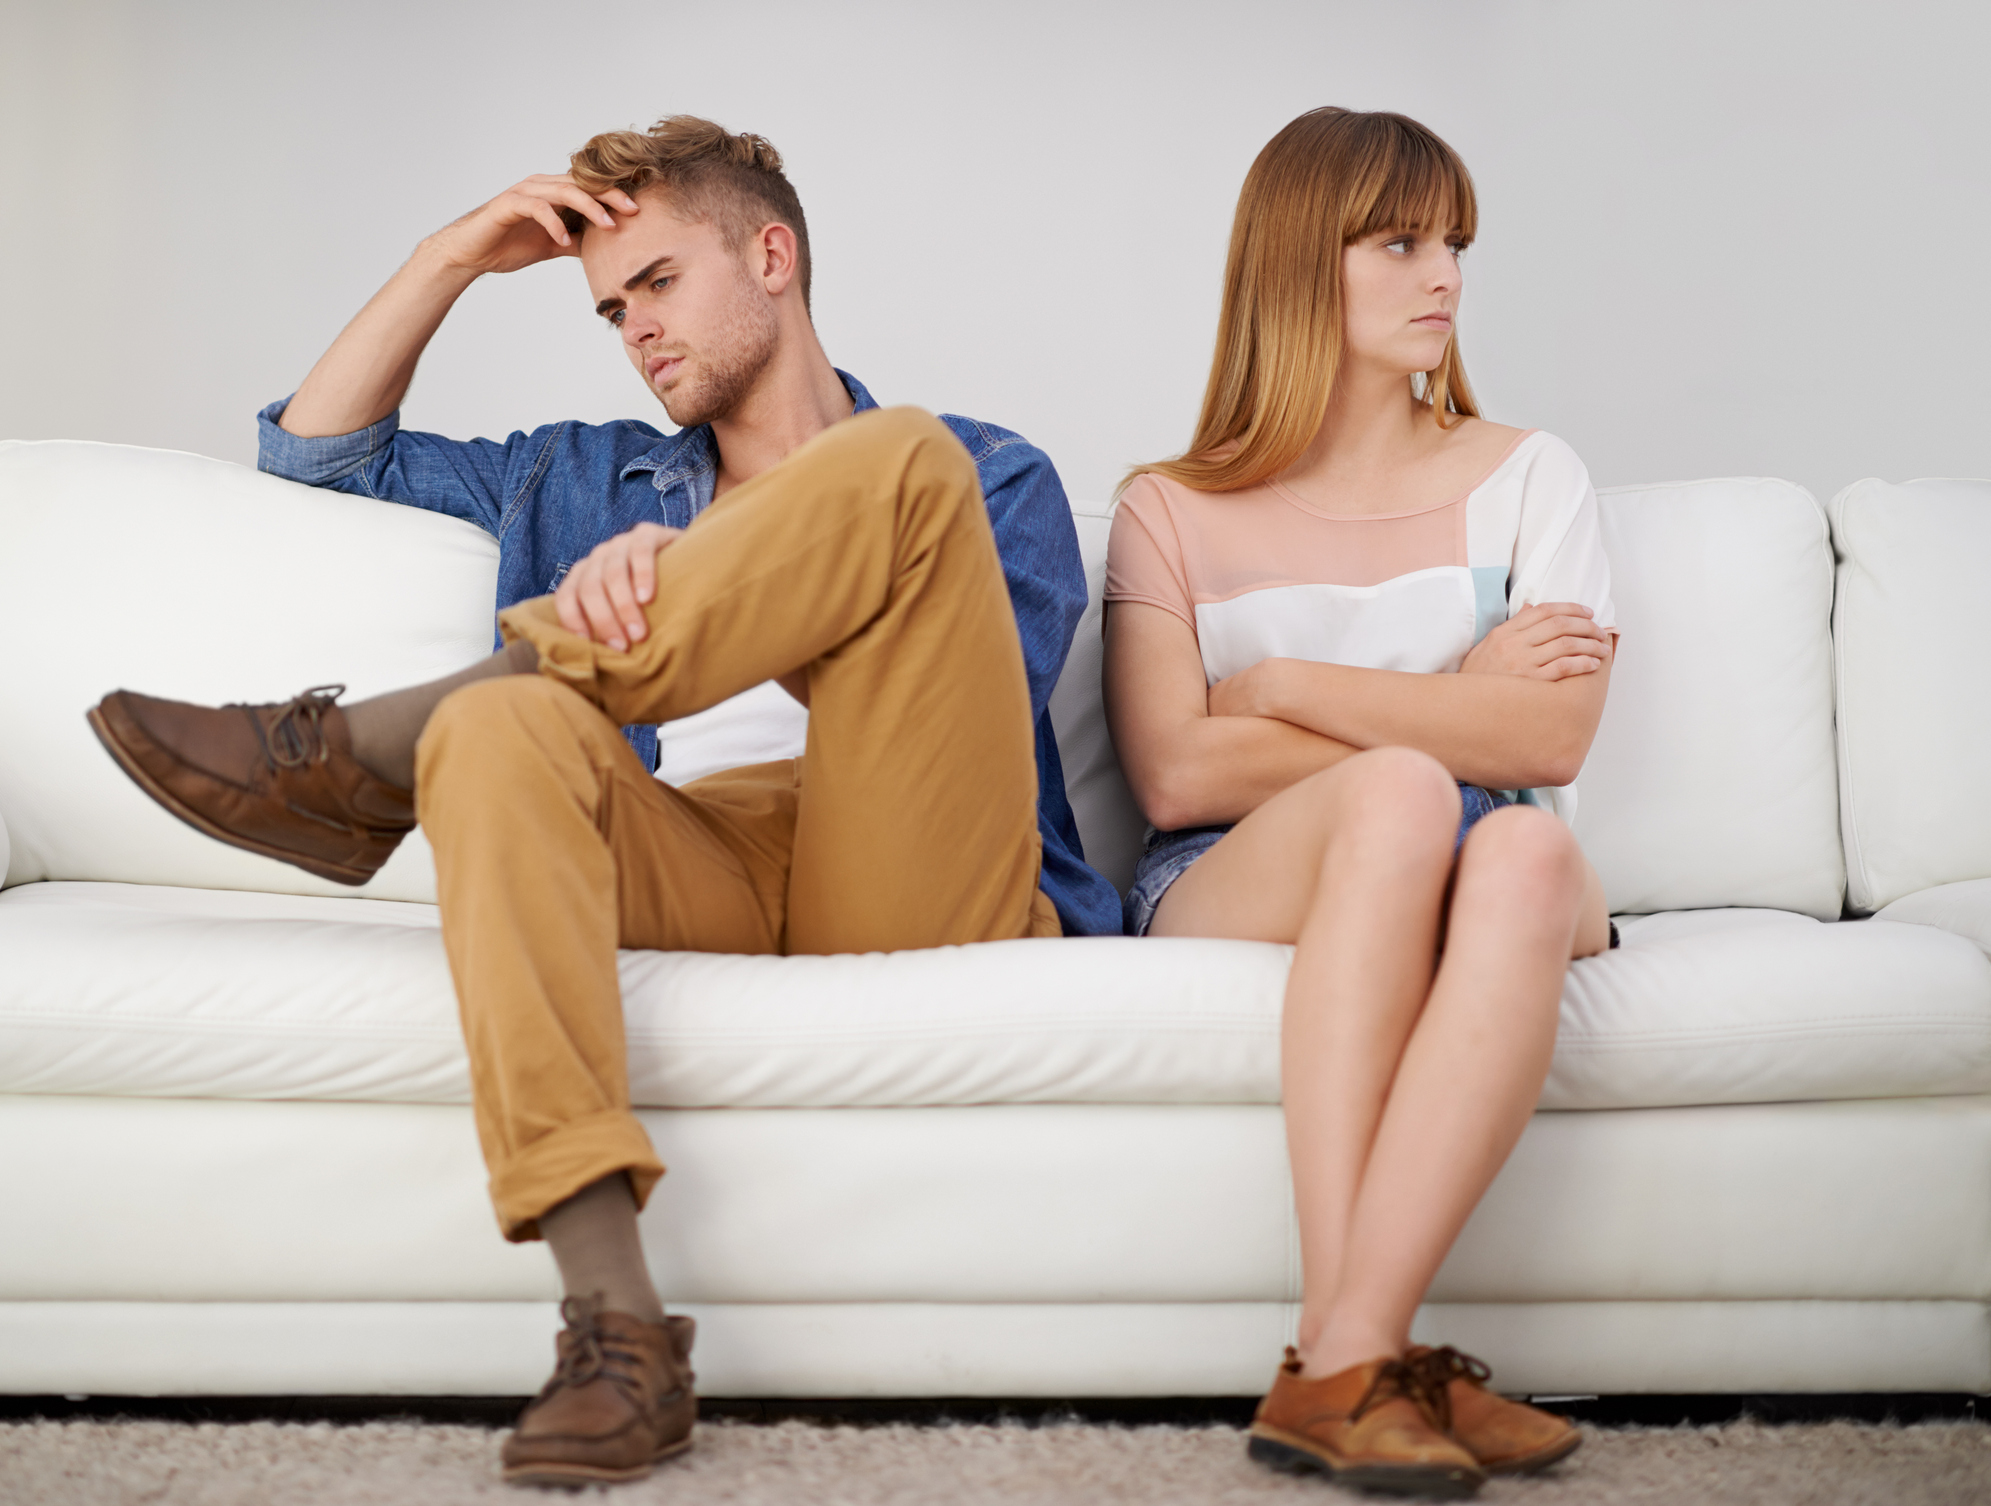 7 Ways To Properly Resolve Conflicts In Relationships